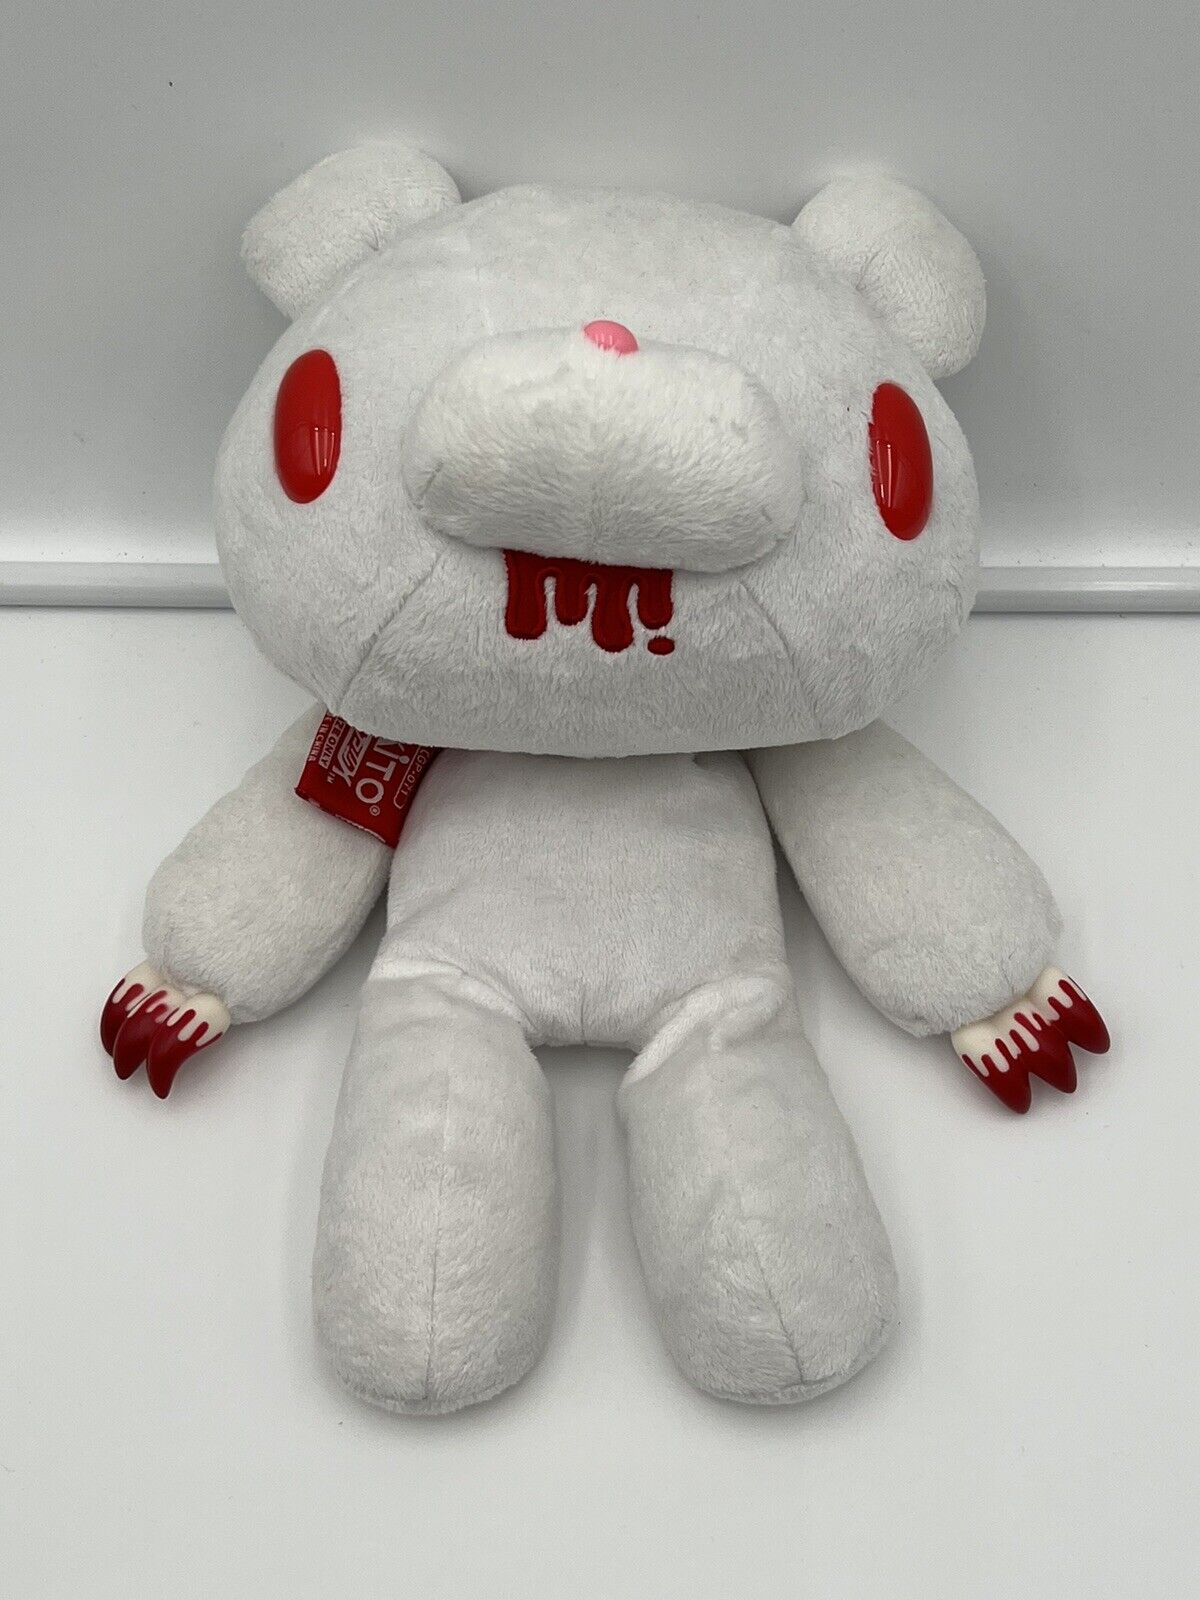 Gloomy Bear Chax GP Plush Toy Prize Only White Red Heavy Blood Version Rare